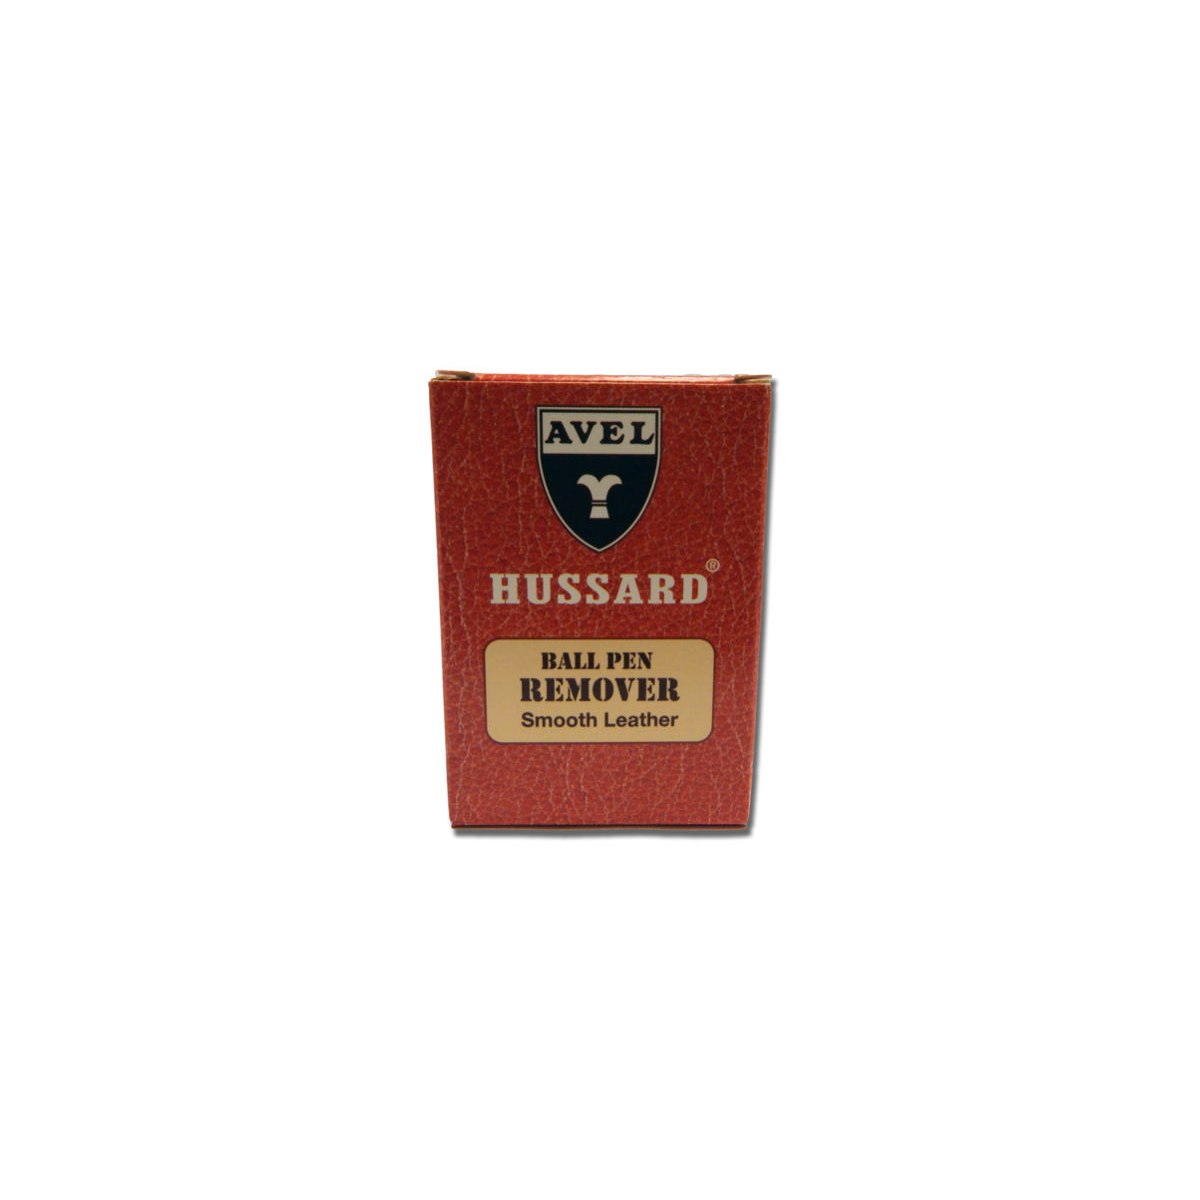 Avel Hussard Ball Pen Ink Remover for Smooth Leather